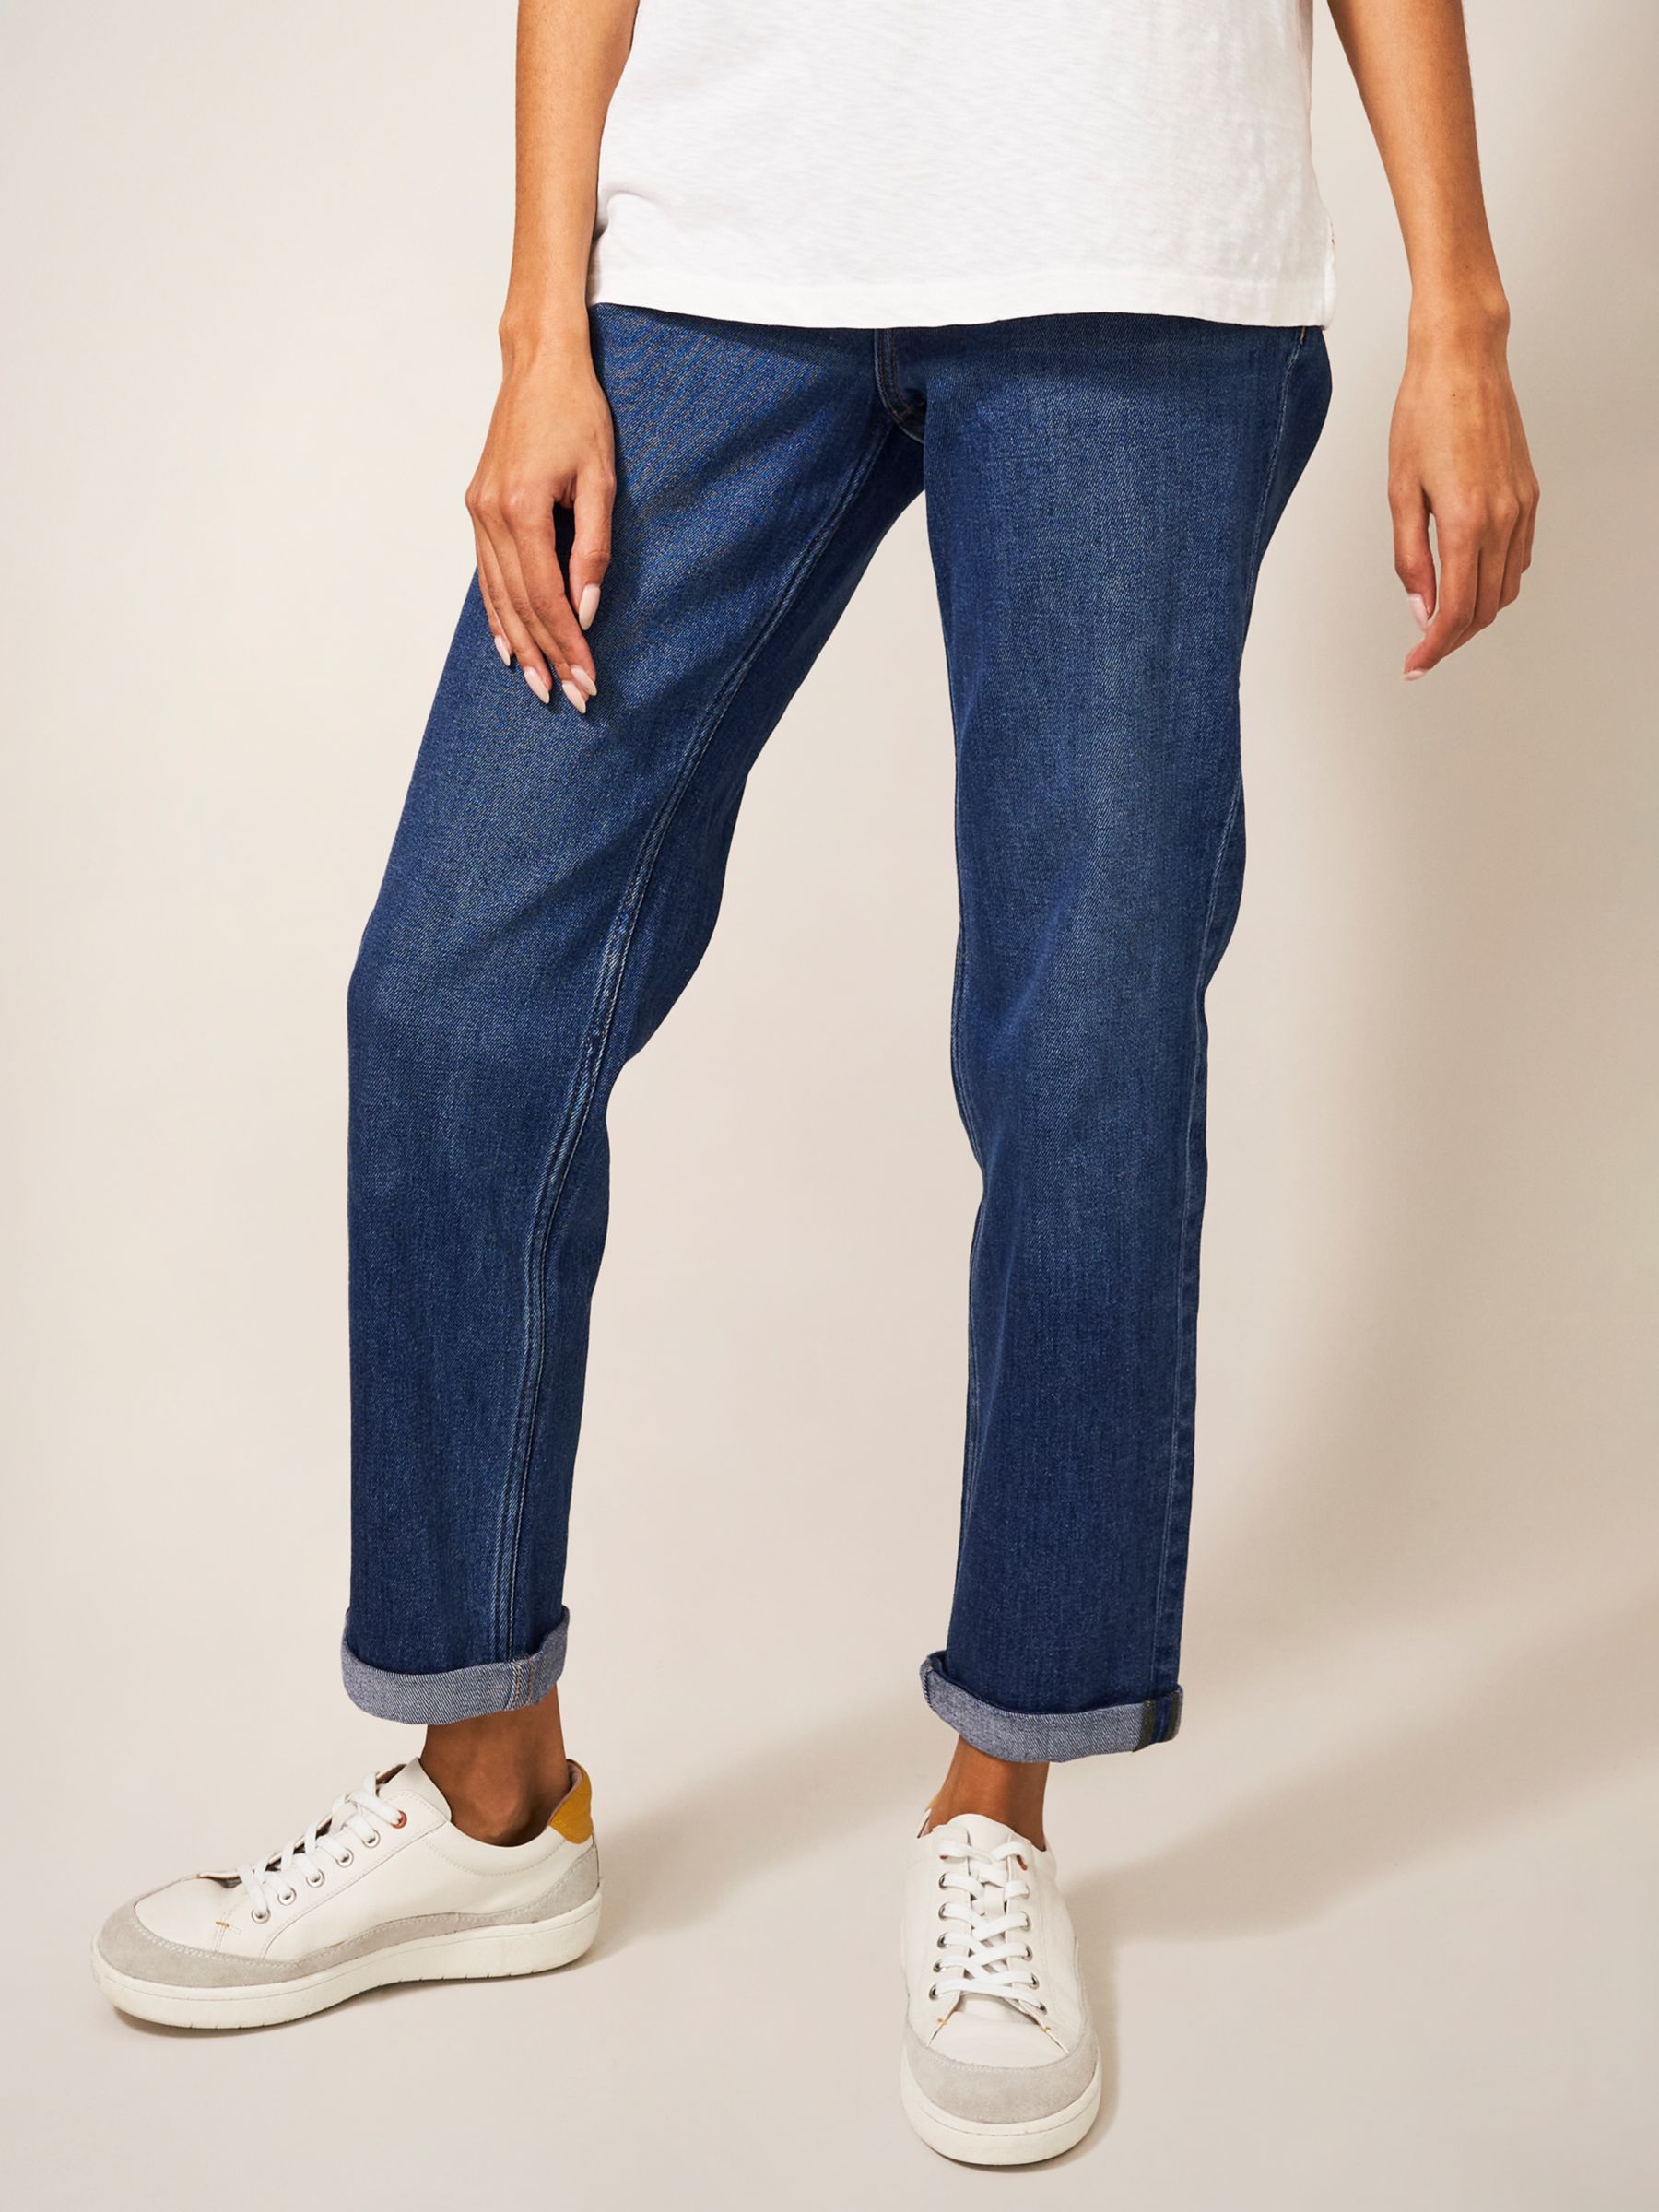 Buy White Stuff Katy Relaxed Slim Fit Jeans Online at johnlewis.com